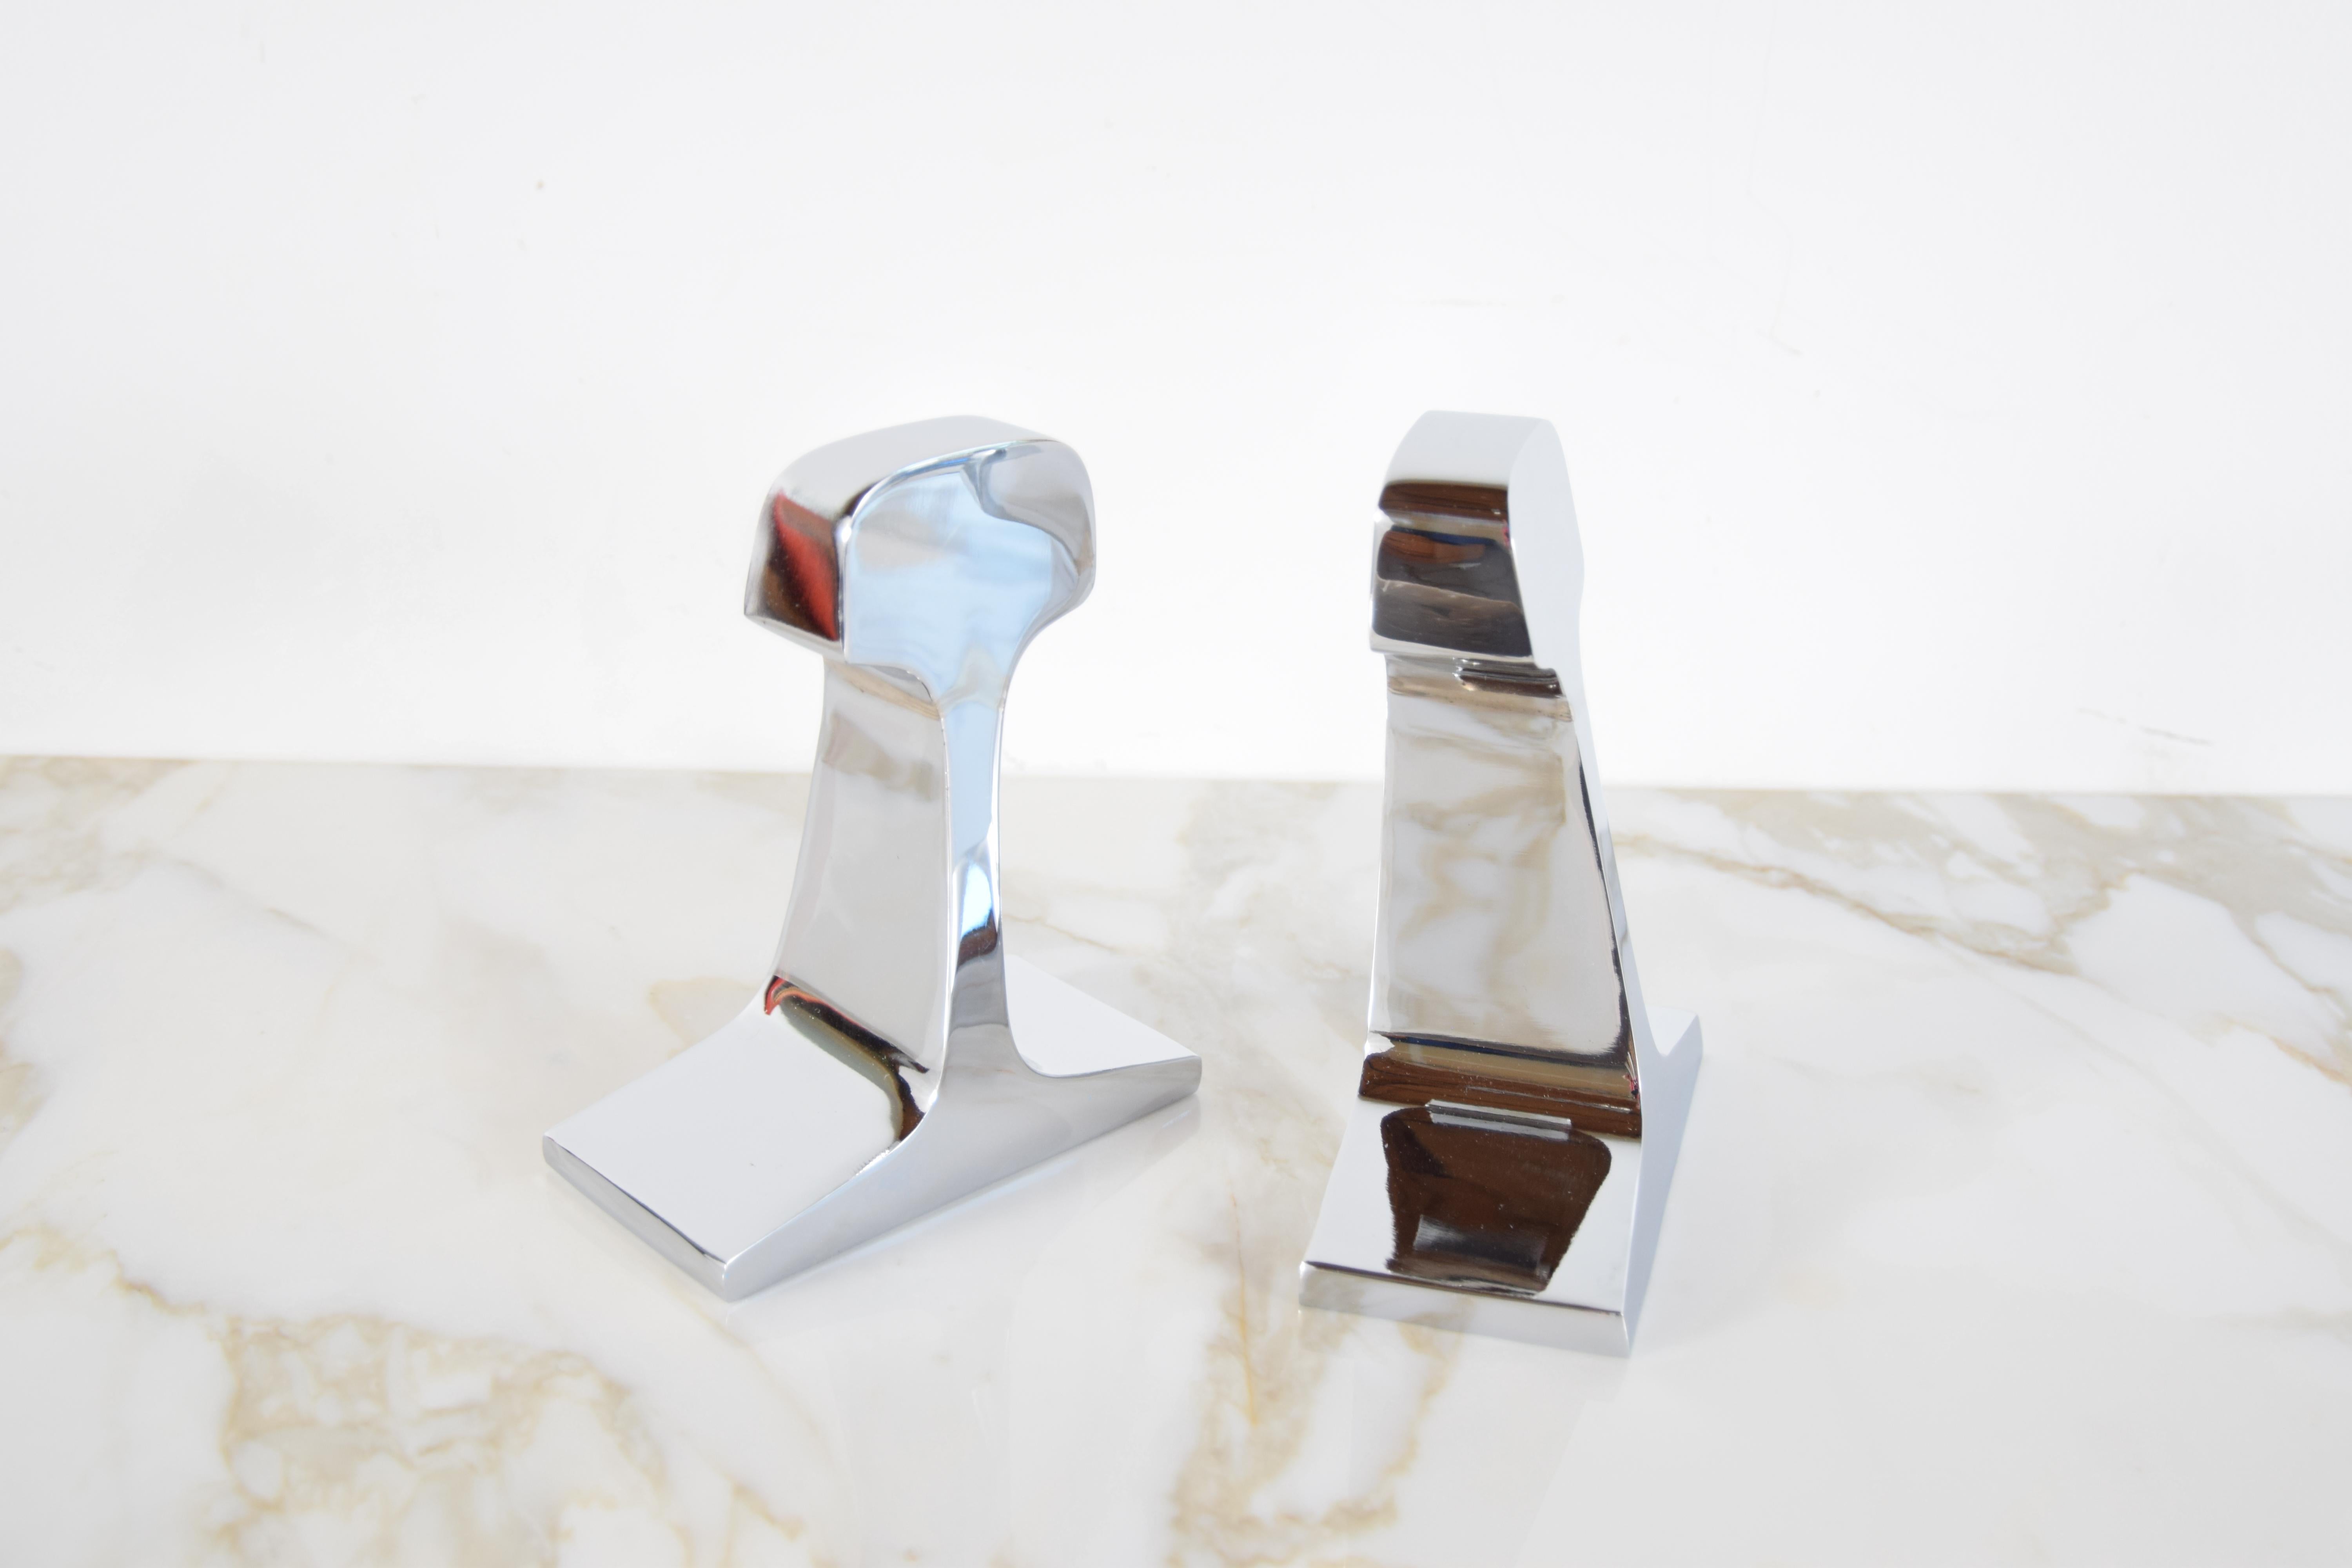 American Modernist Nickel-Plated Railroad Tie Bookends